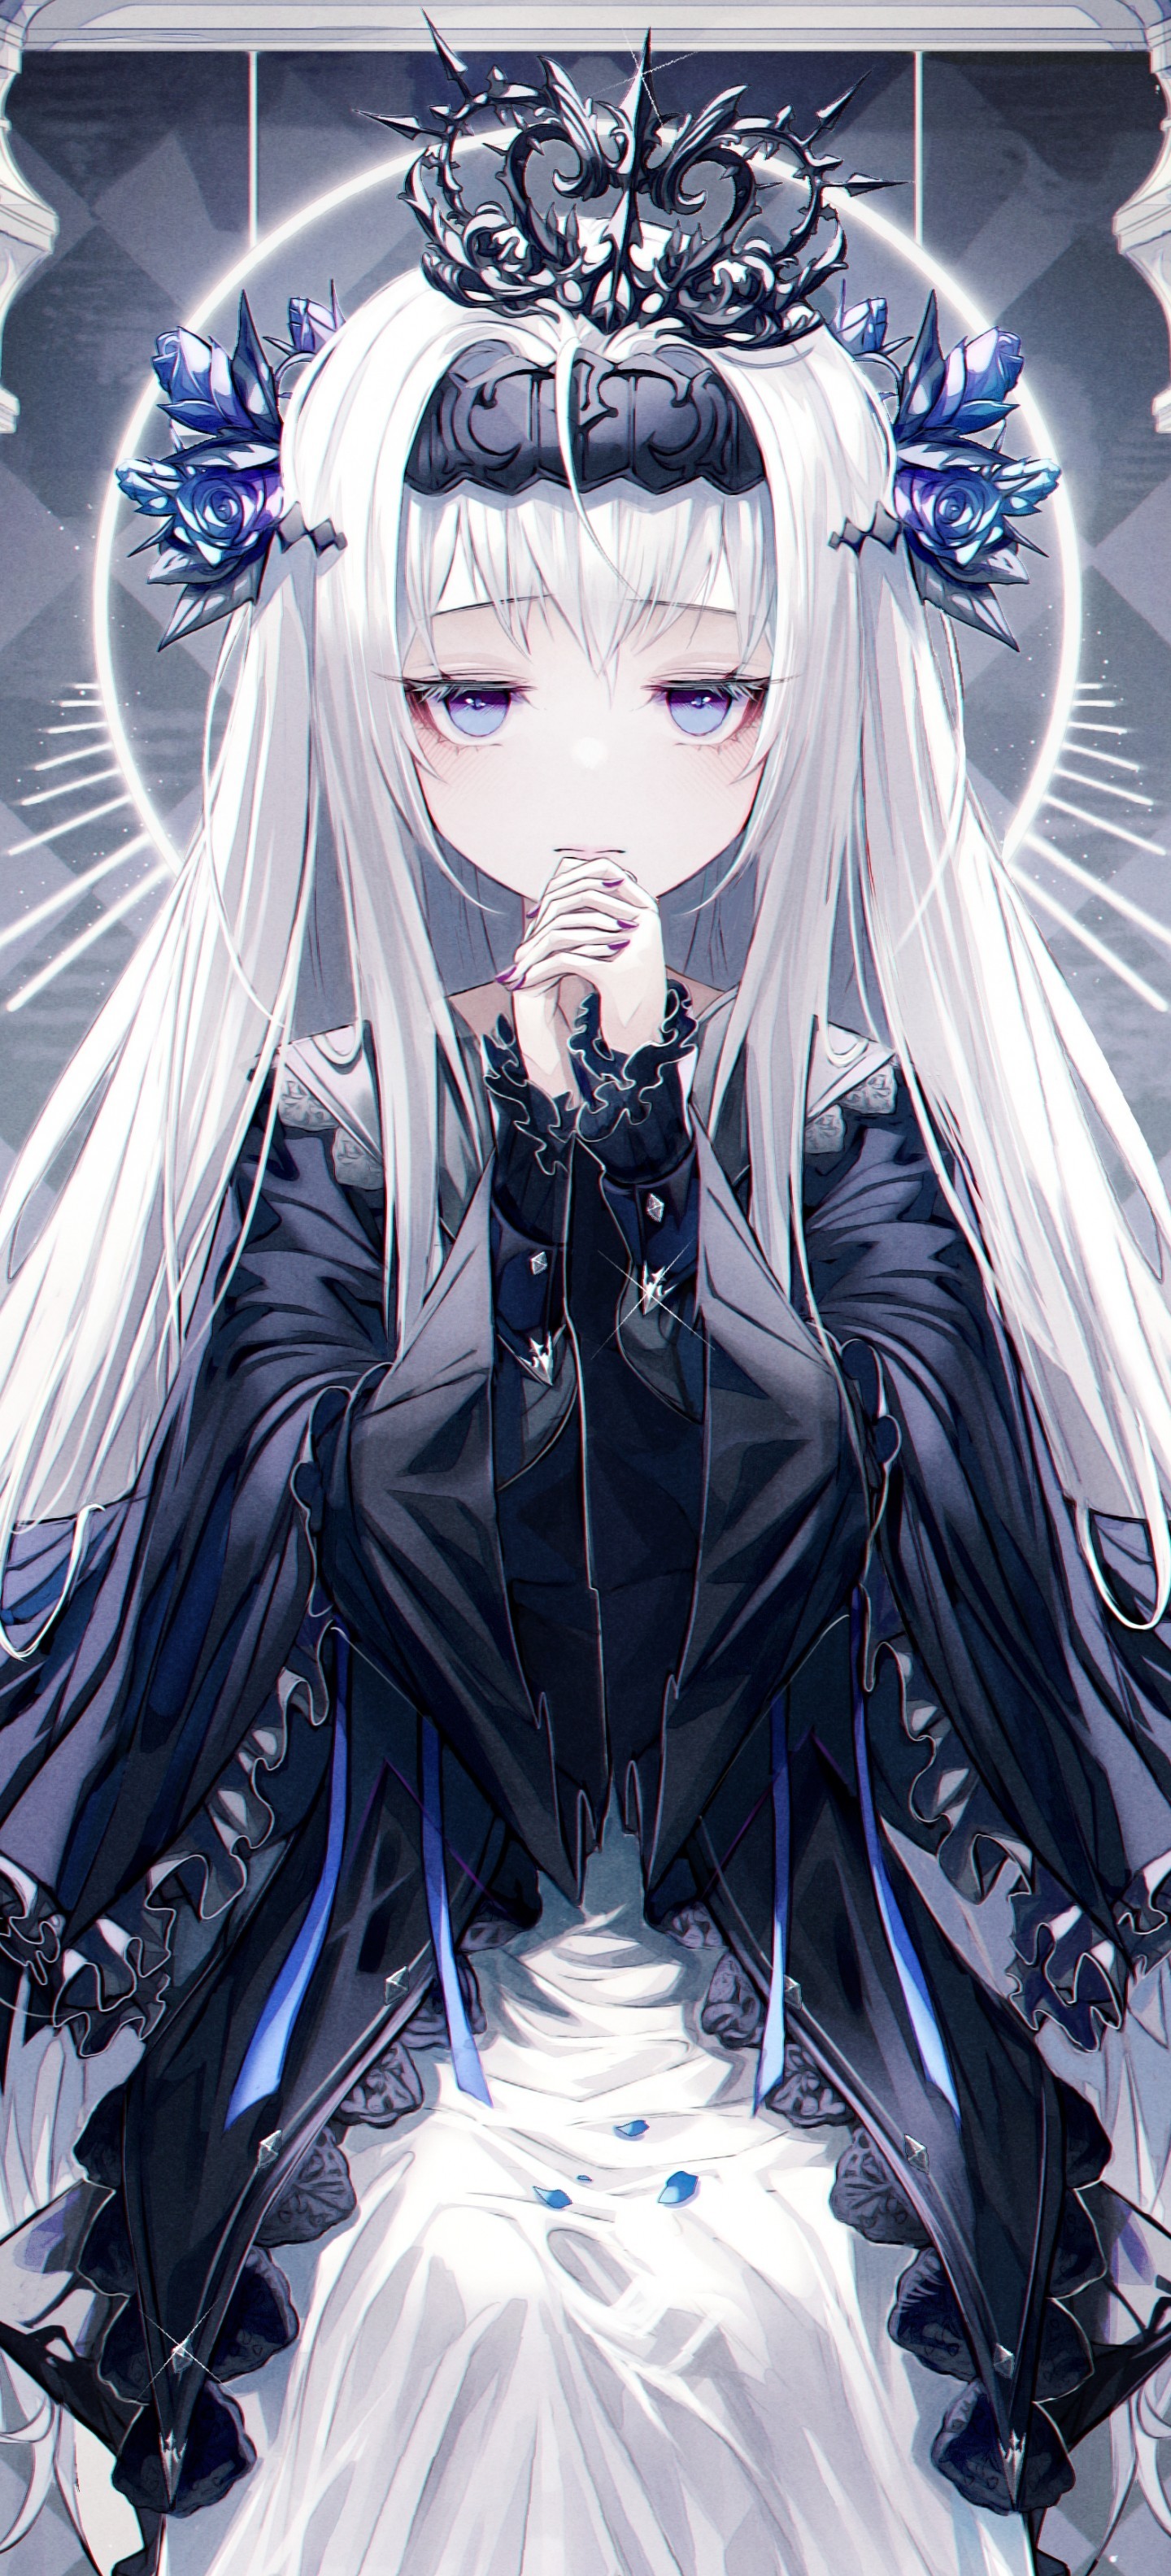 Download 1440x3168 Gothic Anime Girl, Lolita Fashion, Polychromatic, White Hair, Wings, Angel And Devil Wallpaper for OnePlus 8 Pro, Oppo Find X2